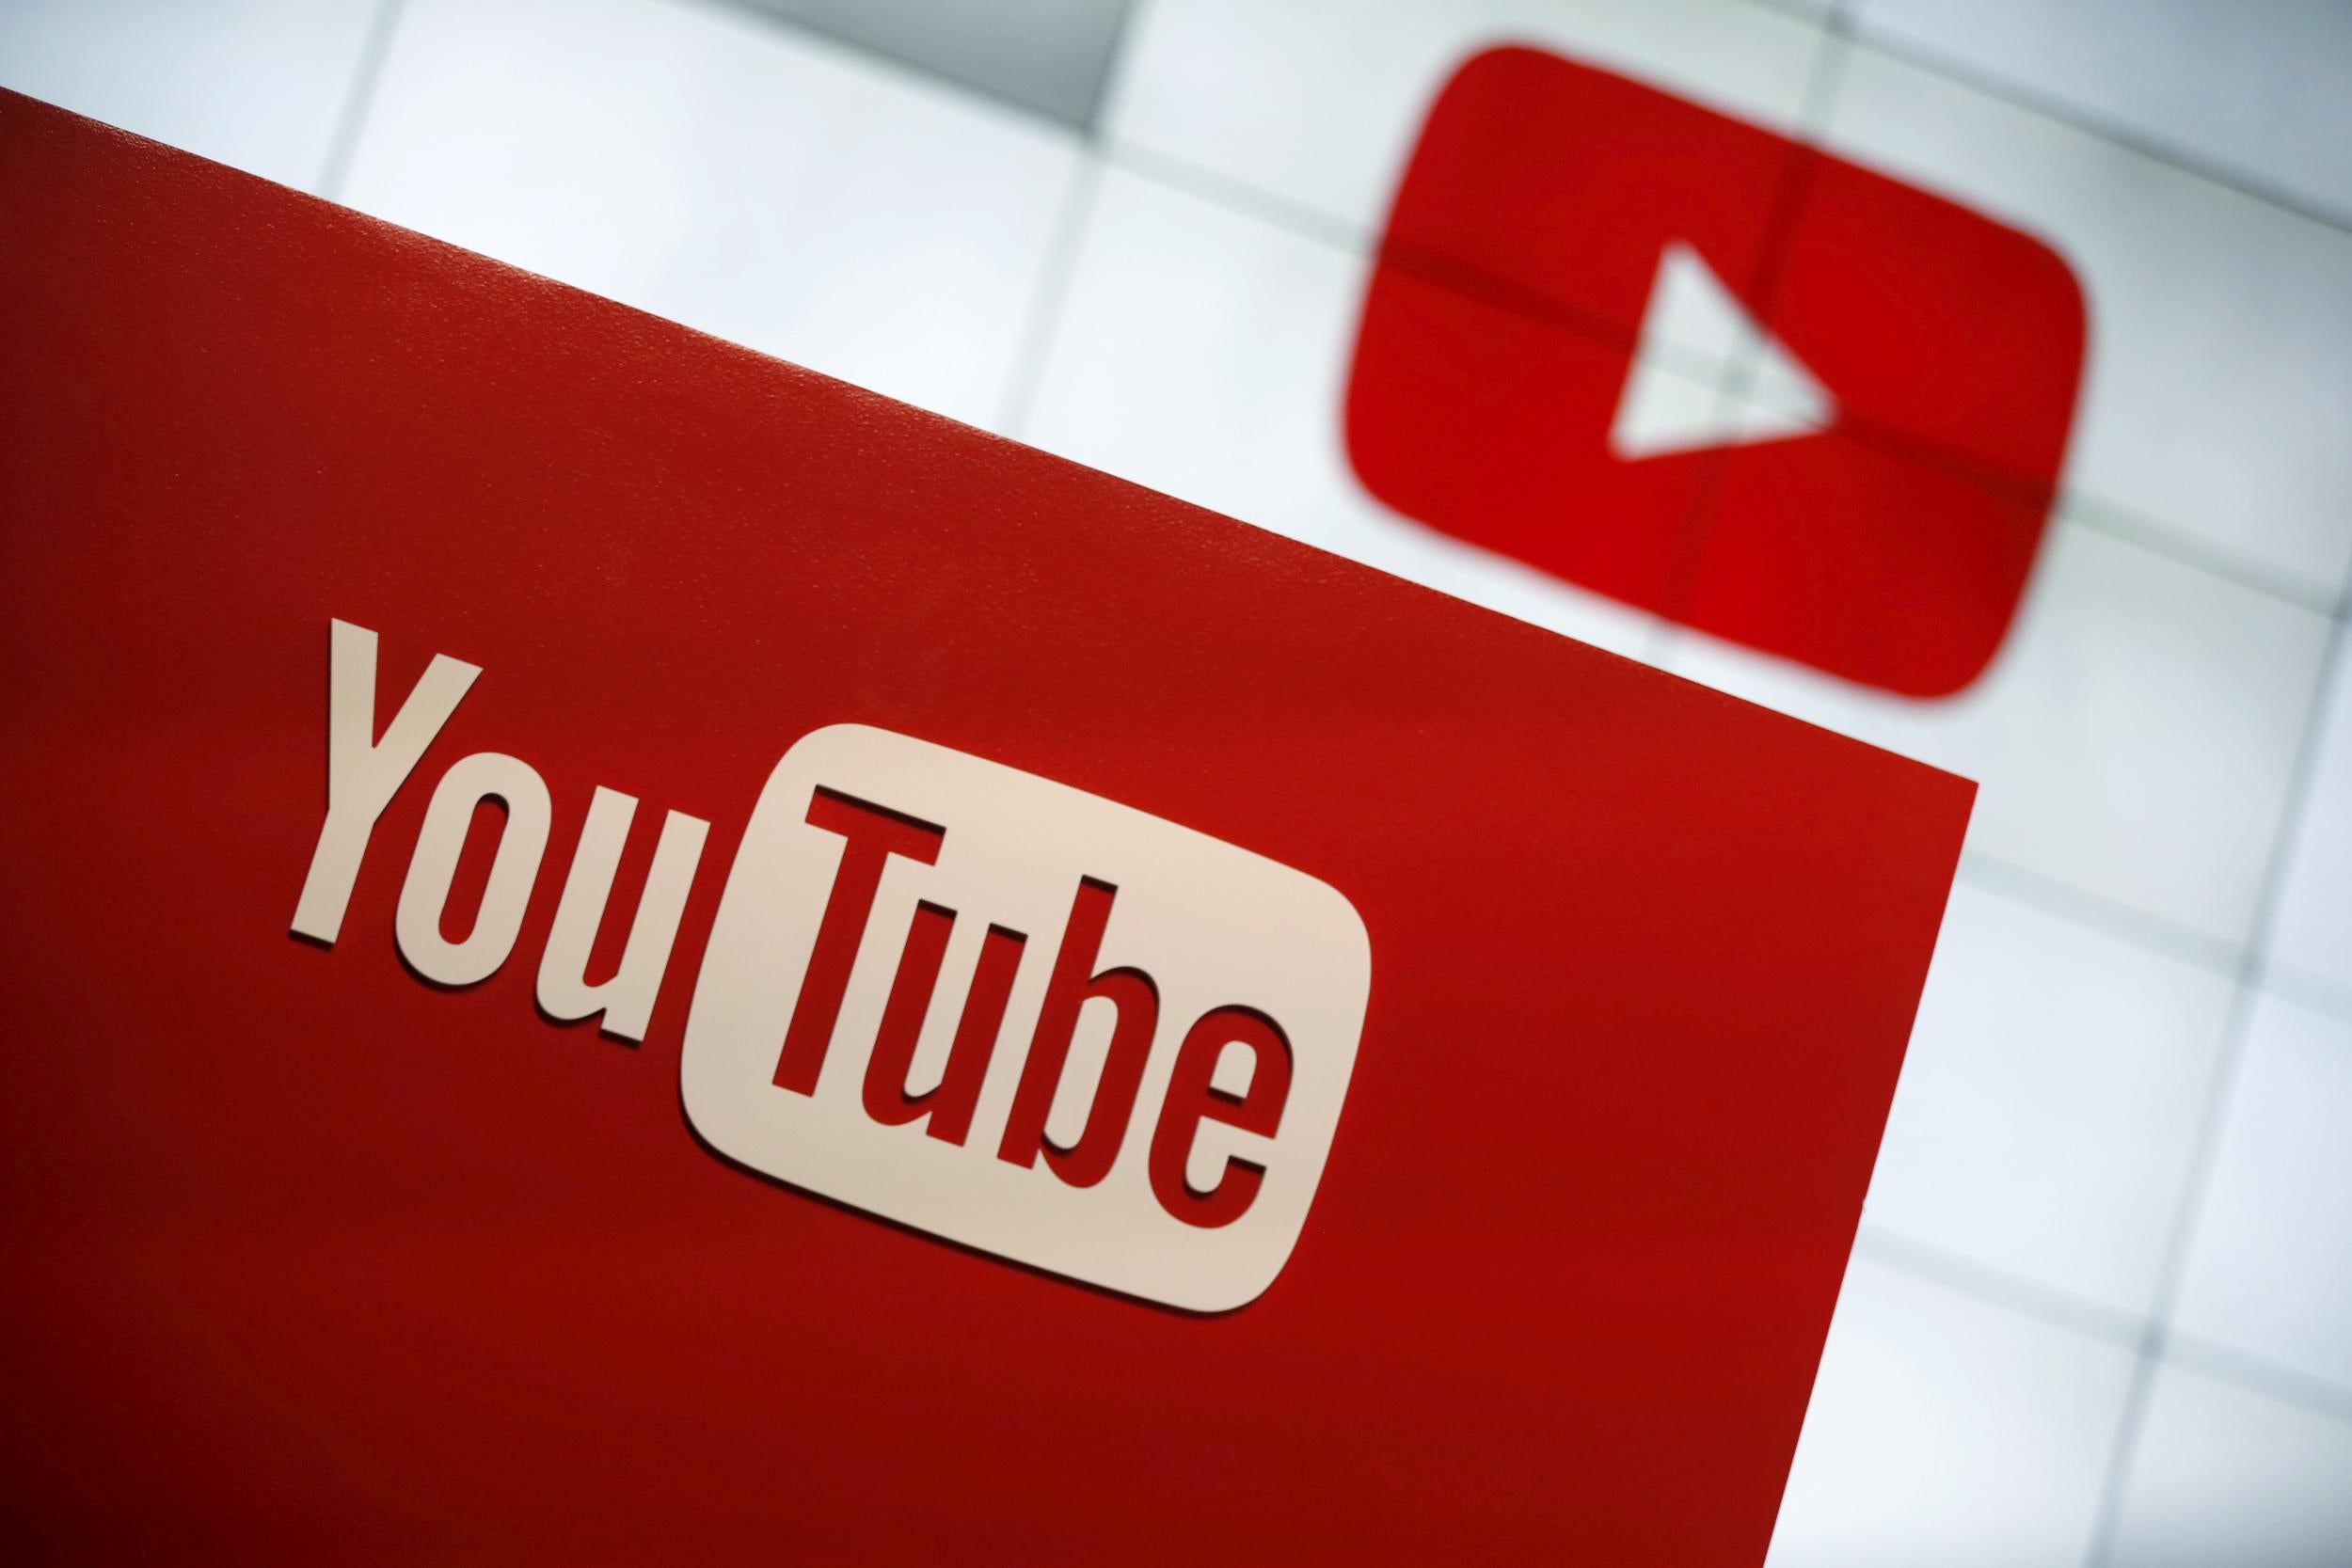 Illegal YouTube download services have continued to blight the platform despite it introducing the feature to premium subscirbers